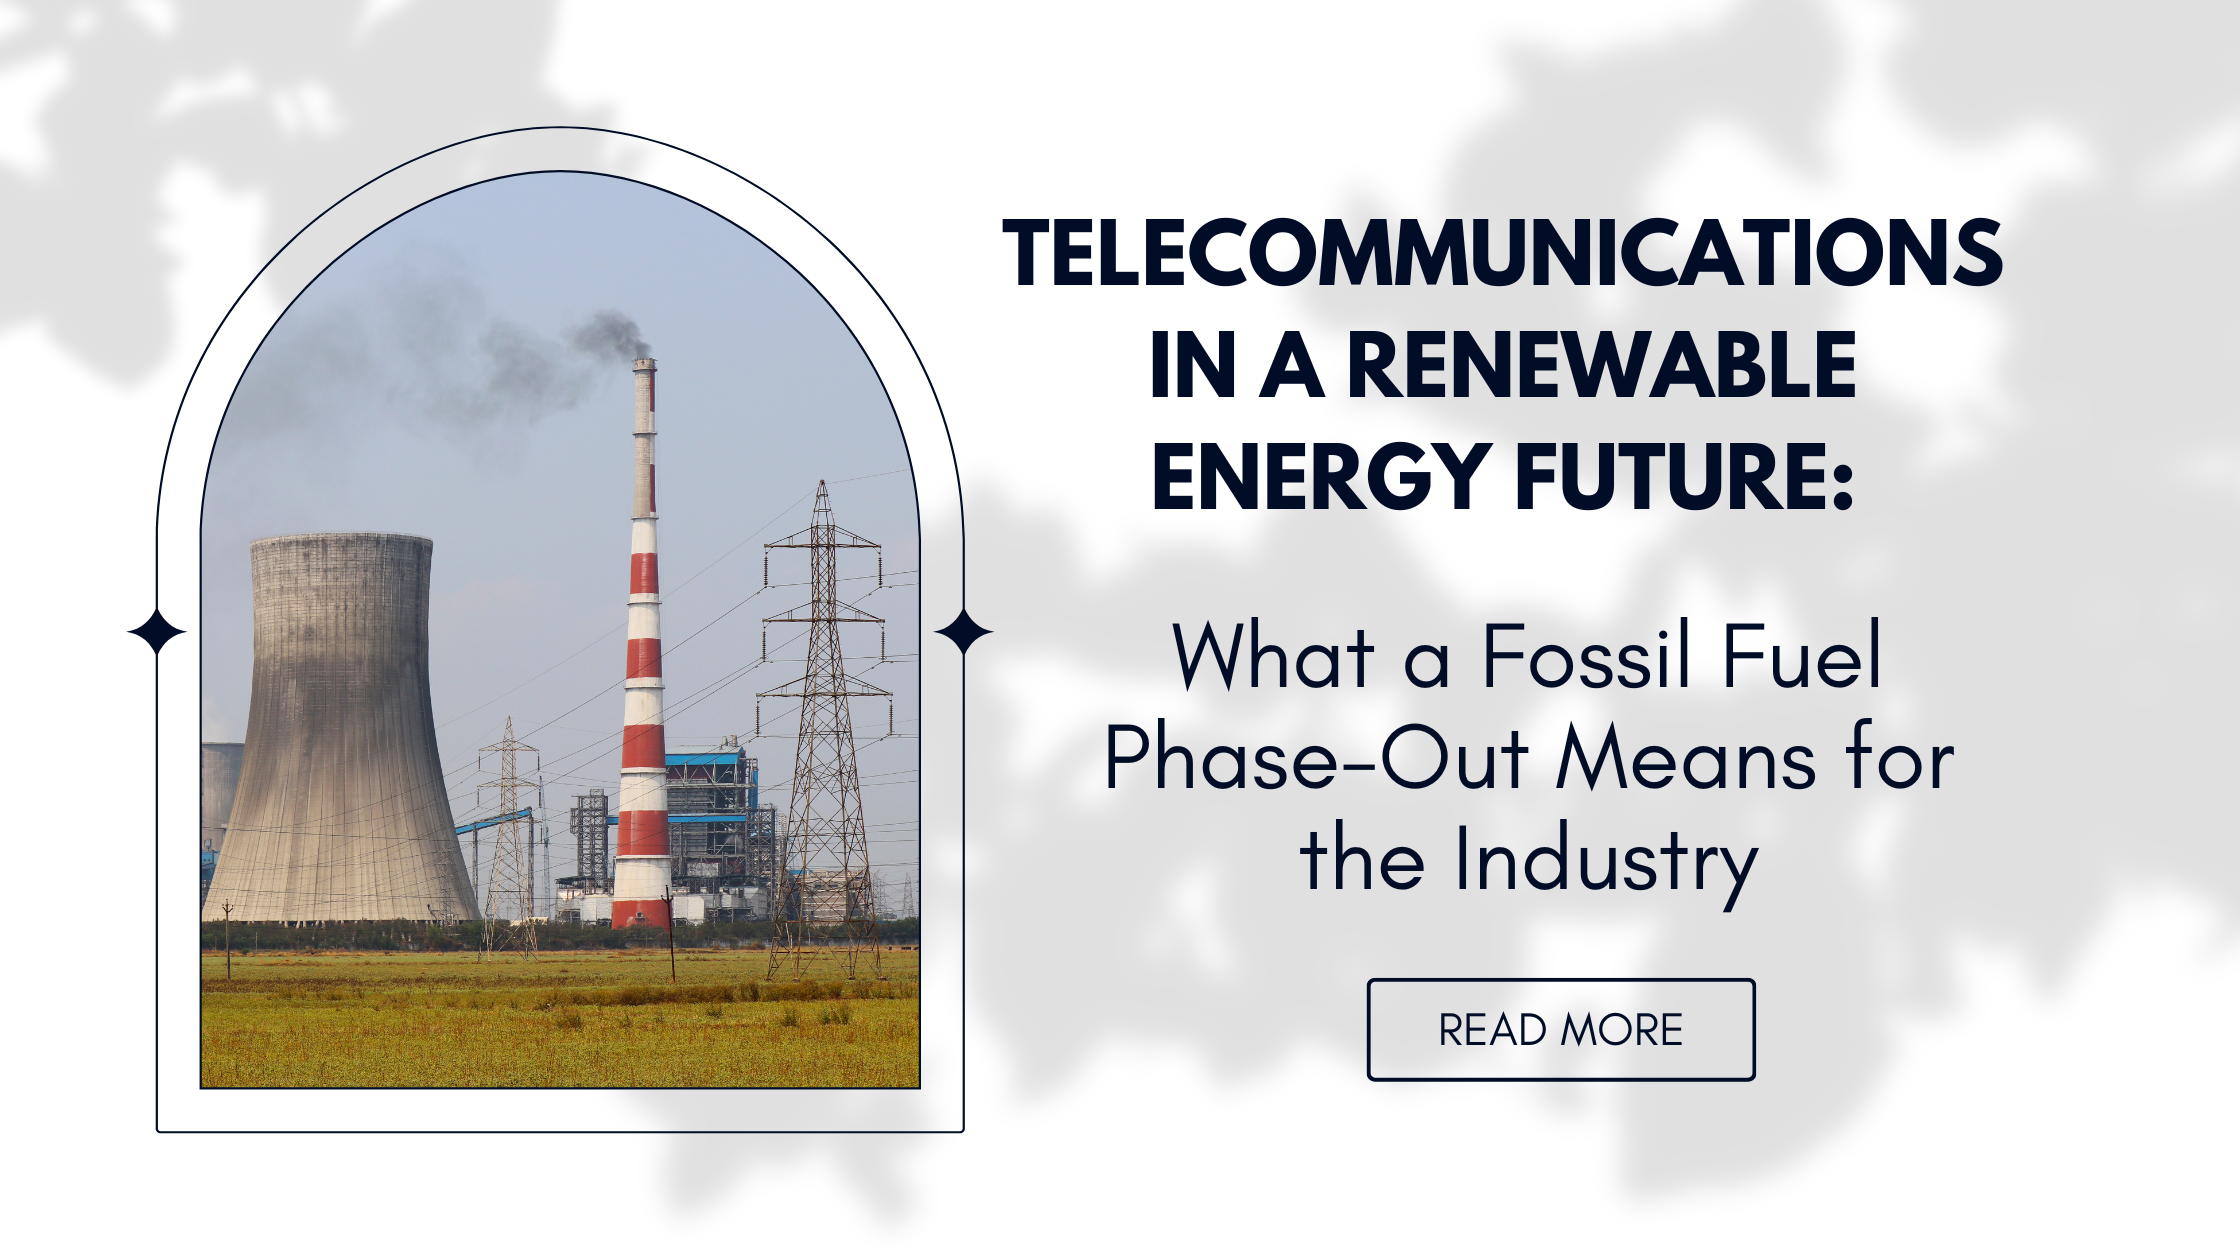 Telecommunications in a Renewable Energy Future: What a Fossil Fuel Phase-Out Means for the Industry